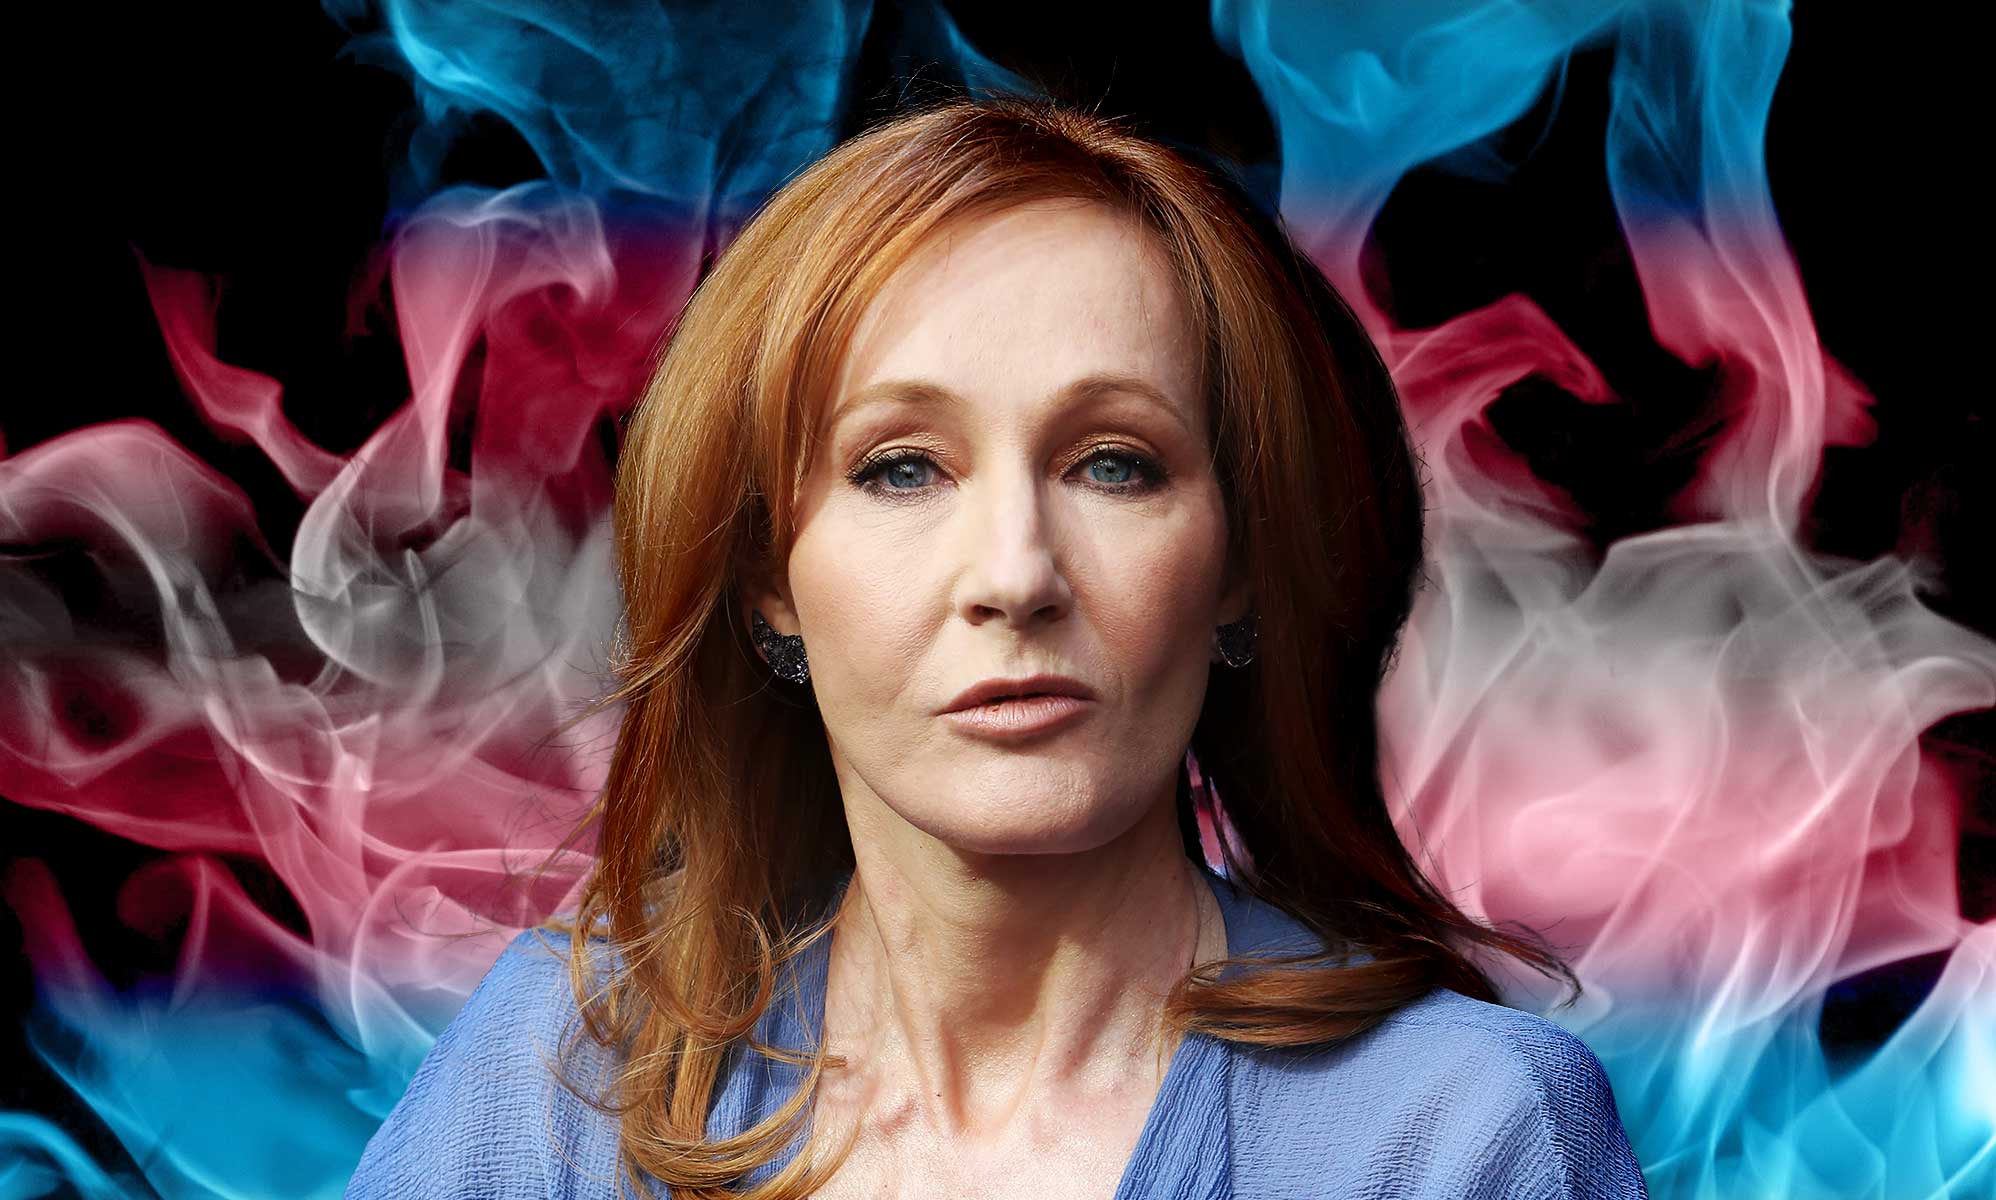 J.K. Rowling to release 12 new Harry Potter stories for fans